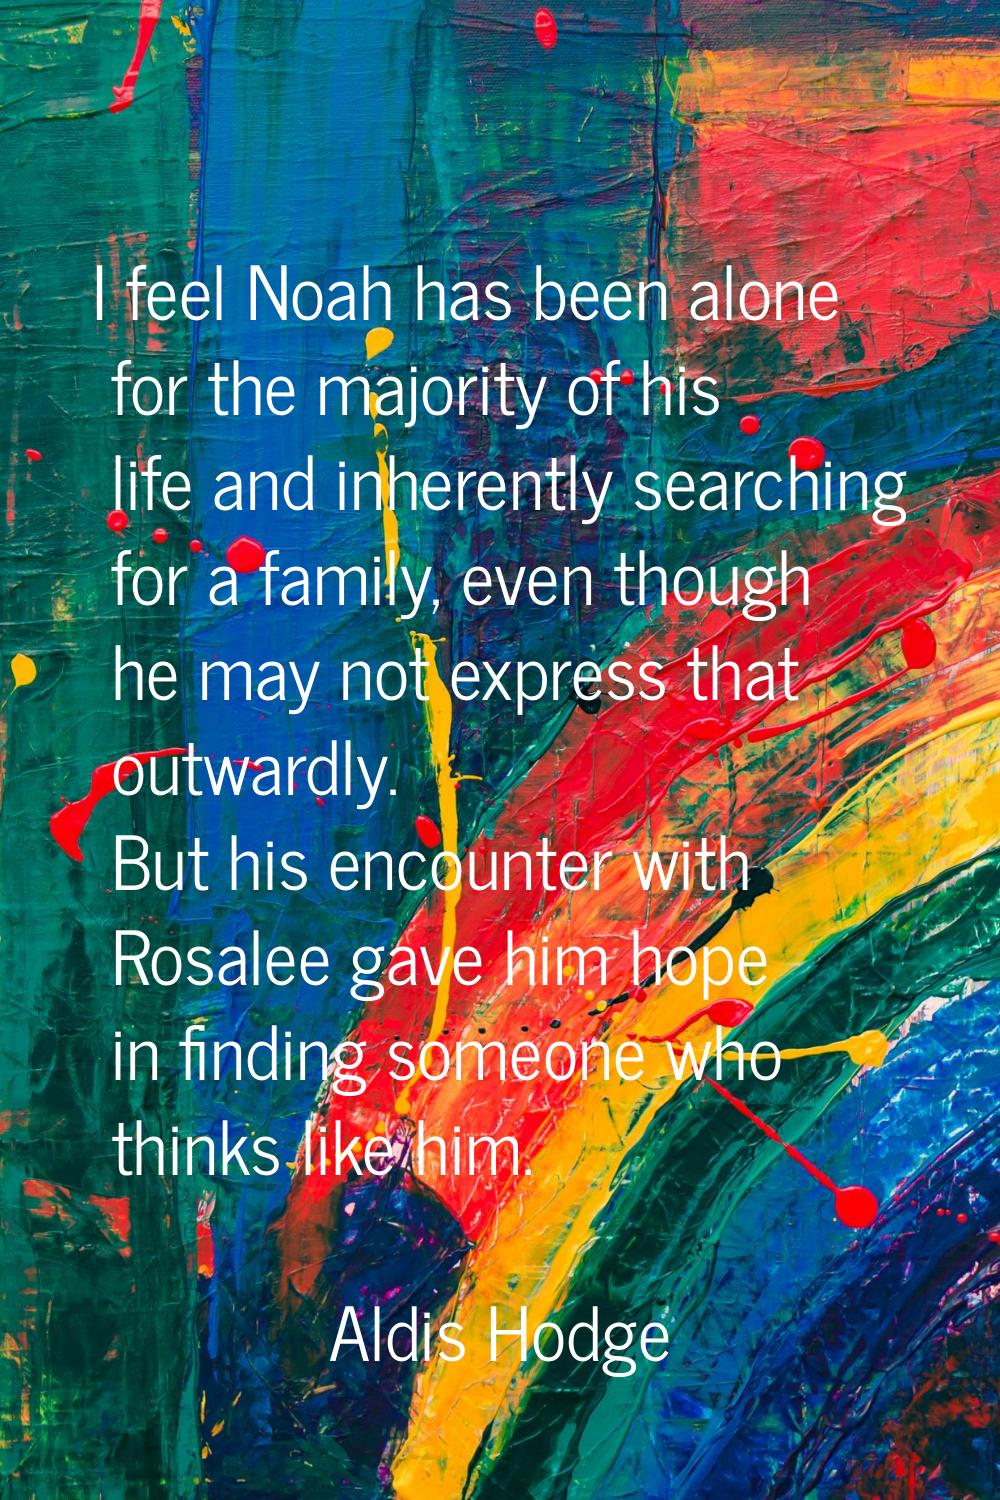 I feel Noah has been alone for the majority of his life and inherently searching for a family, even